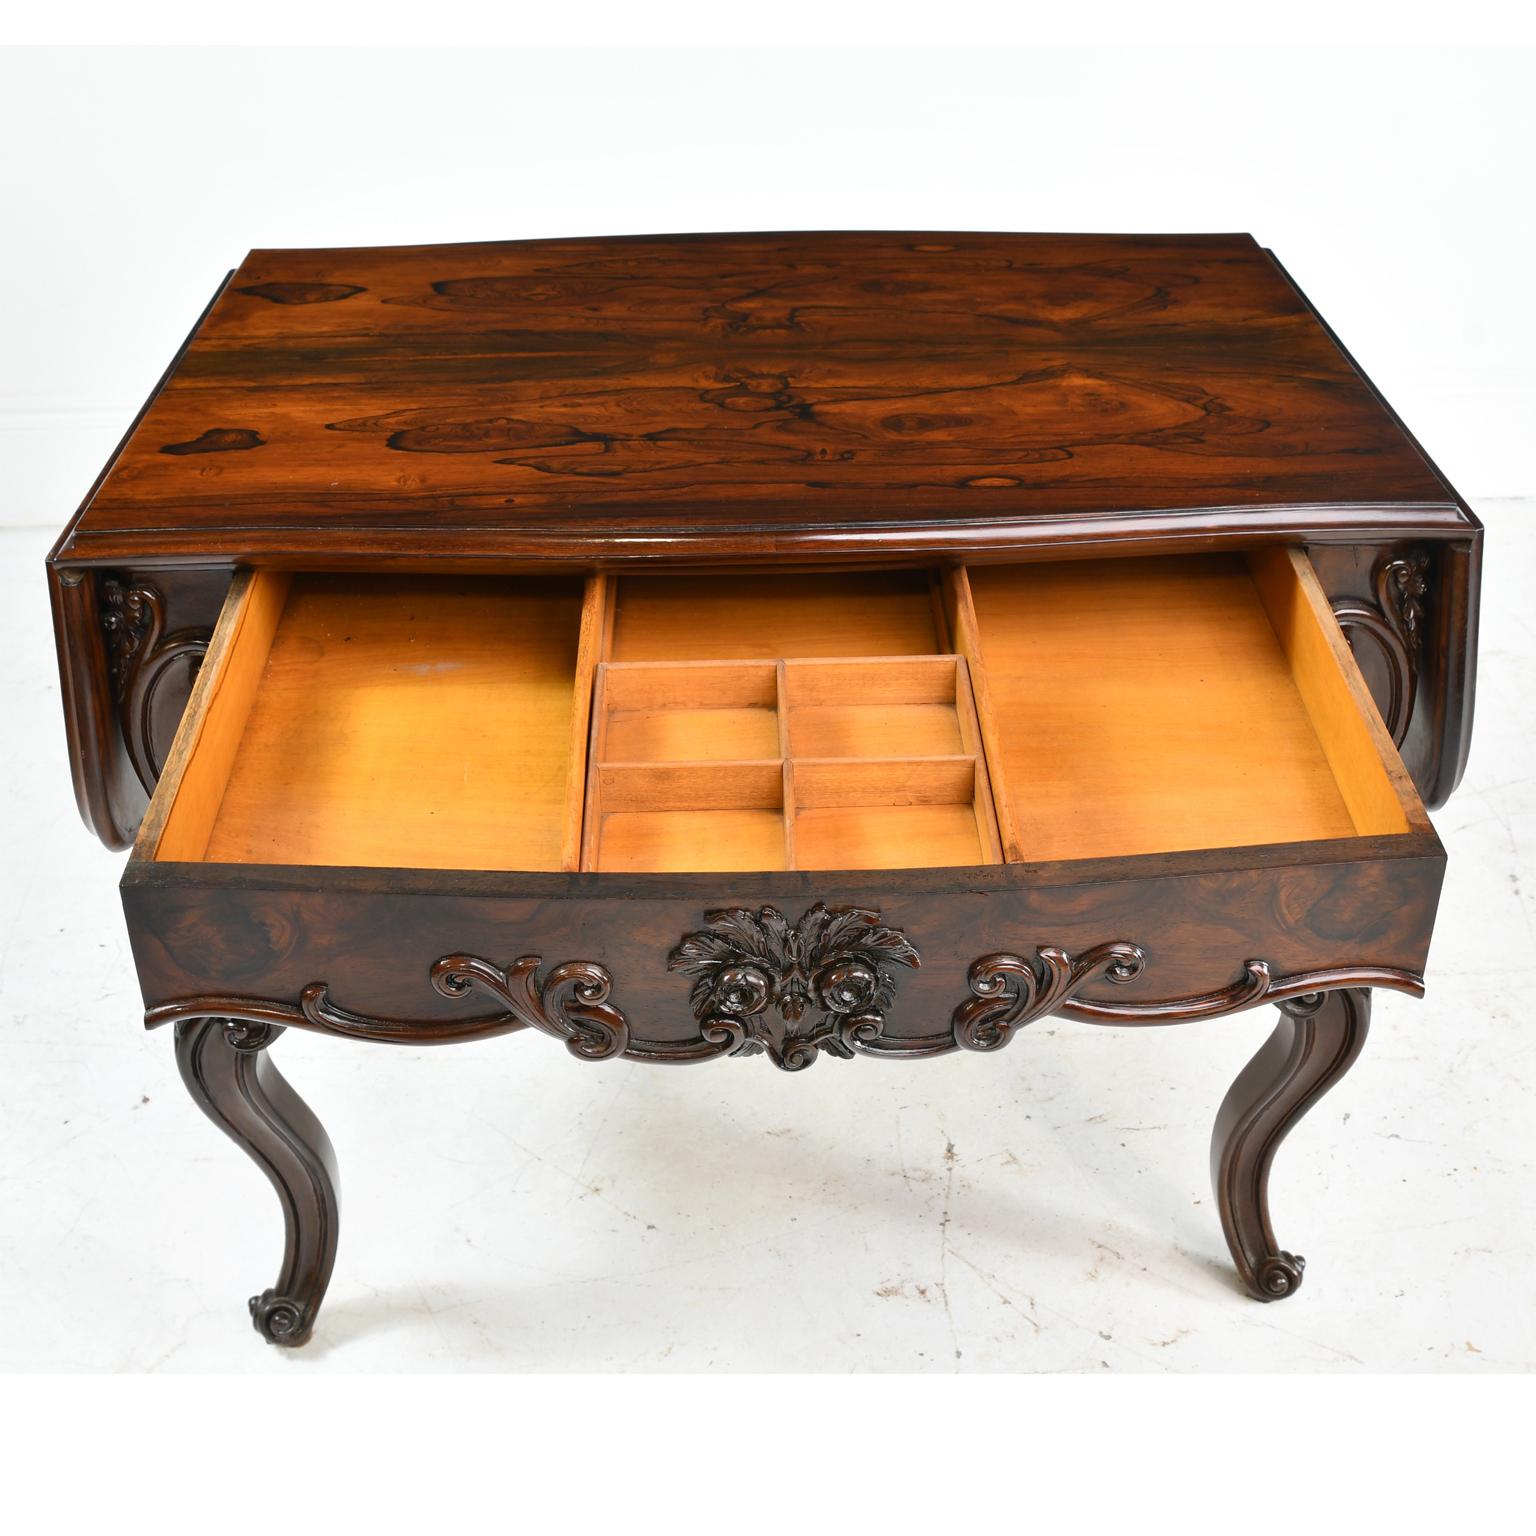 A beautiful American Rococo Revival sofa table in rosewood with shaped drop-leaves, escargot feet, and well-articulated foliate carvings on apron and cabriole legs. Attributable to well-known New York cabinetmaker, Joseph Meeks & Sons. This is a